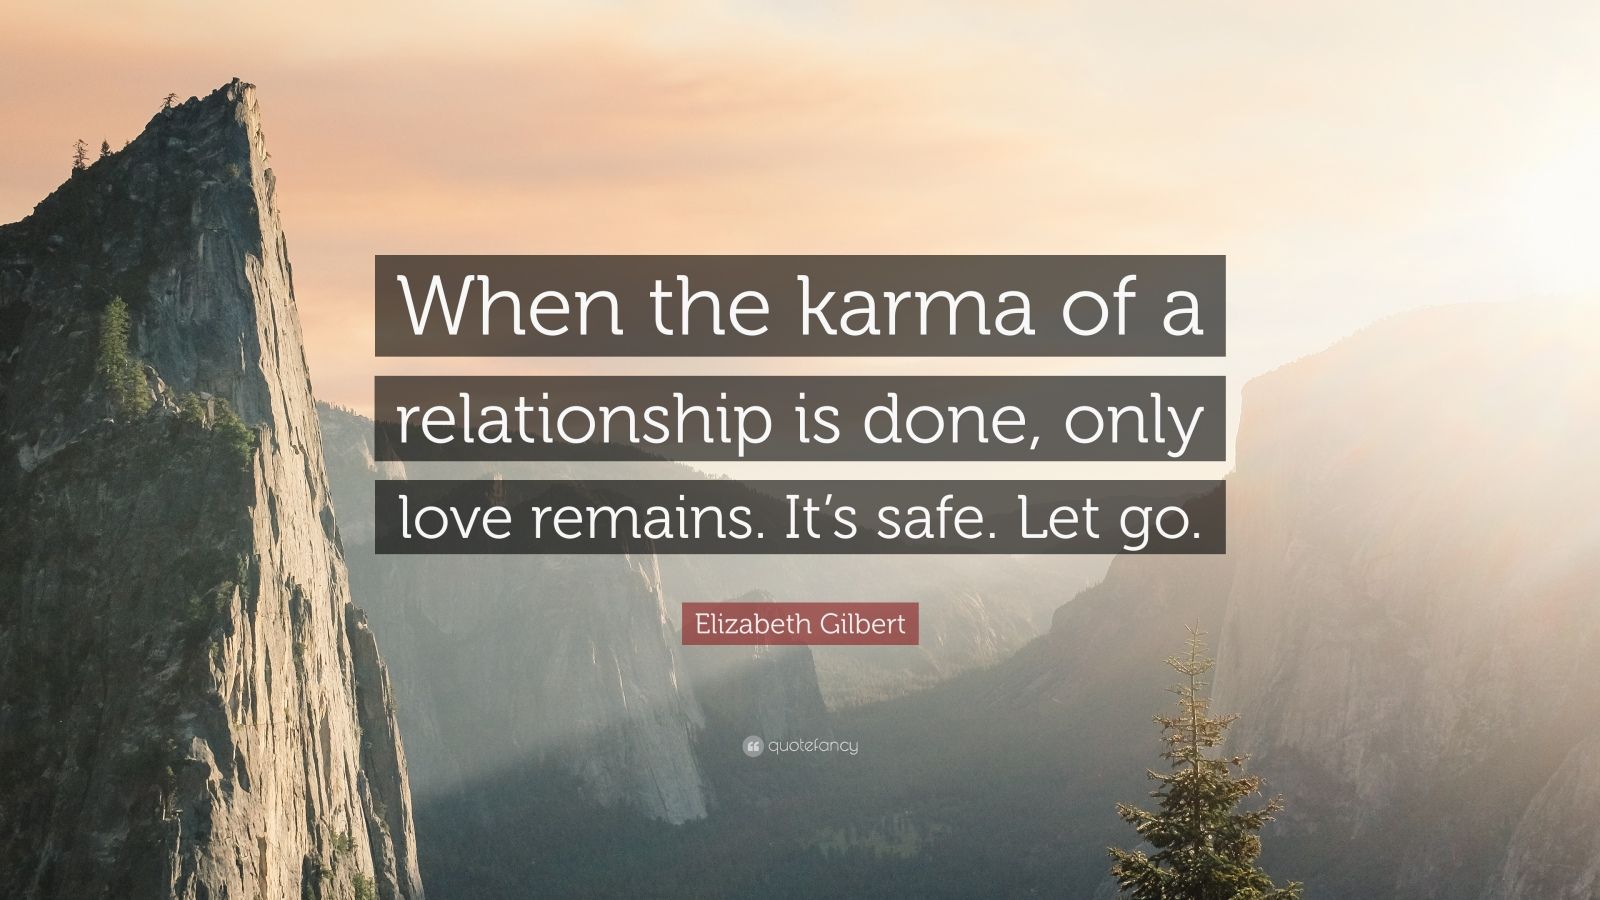 Elizabeth Gilbert Quote: “When the karma of a relationship is done ...